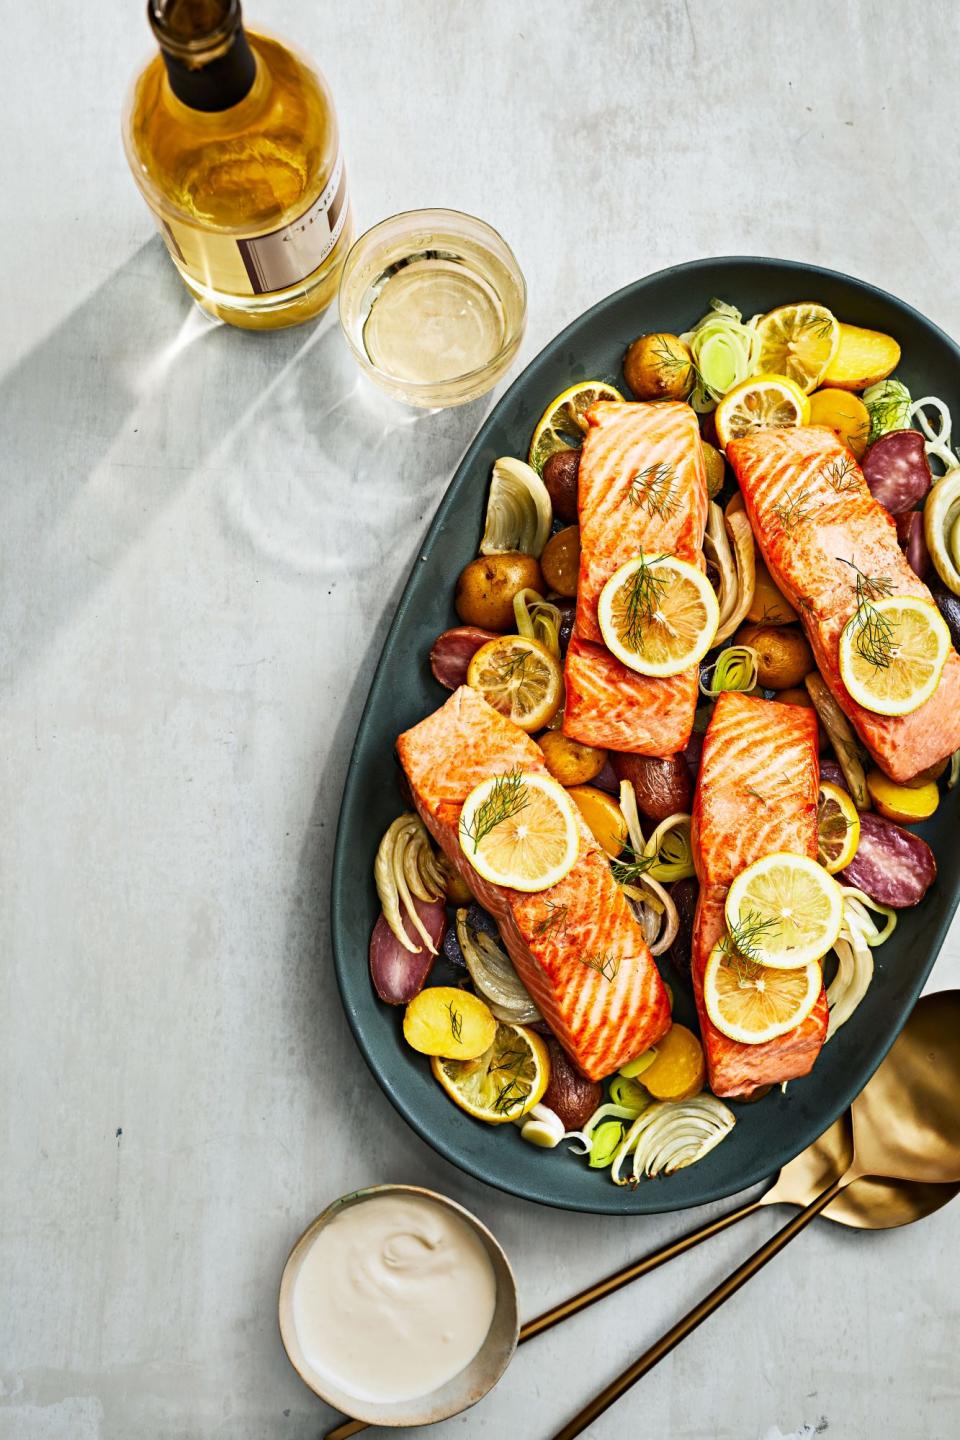 Lemony Slow-Cooked Salmon with Potatoes and Fennel